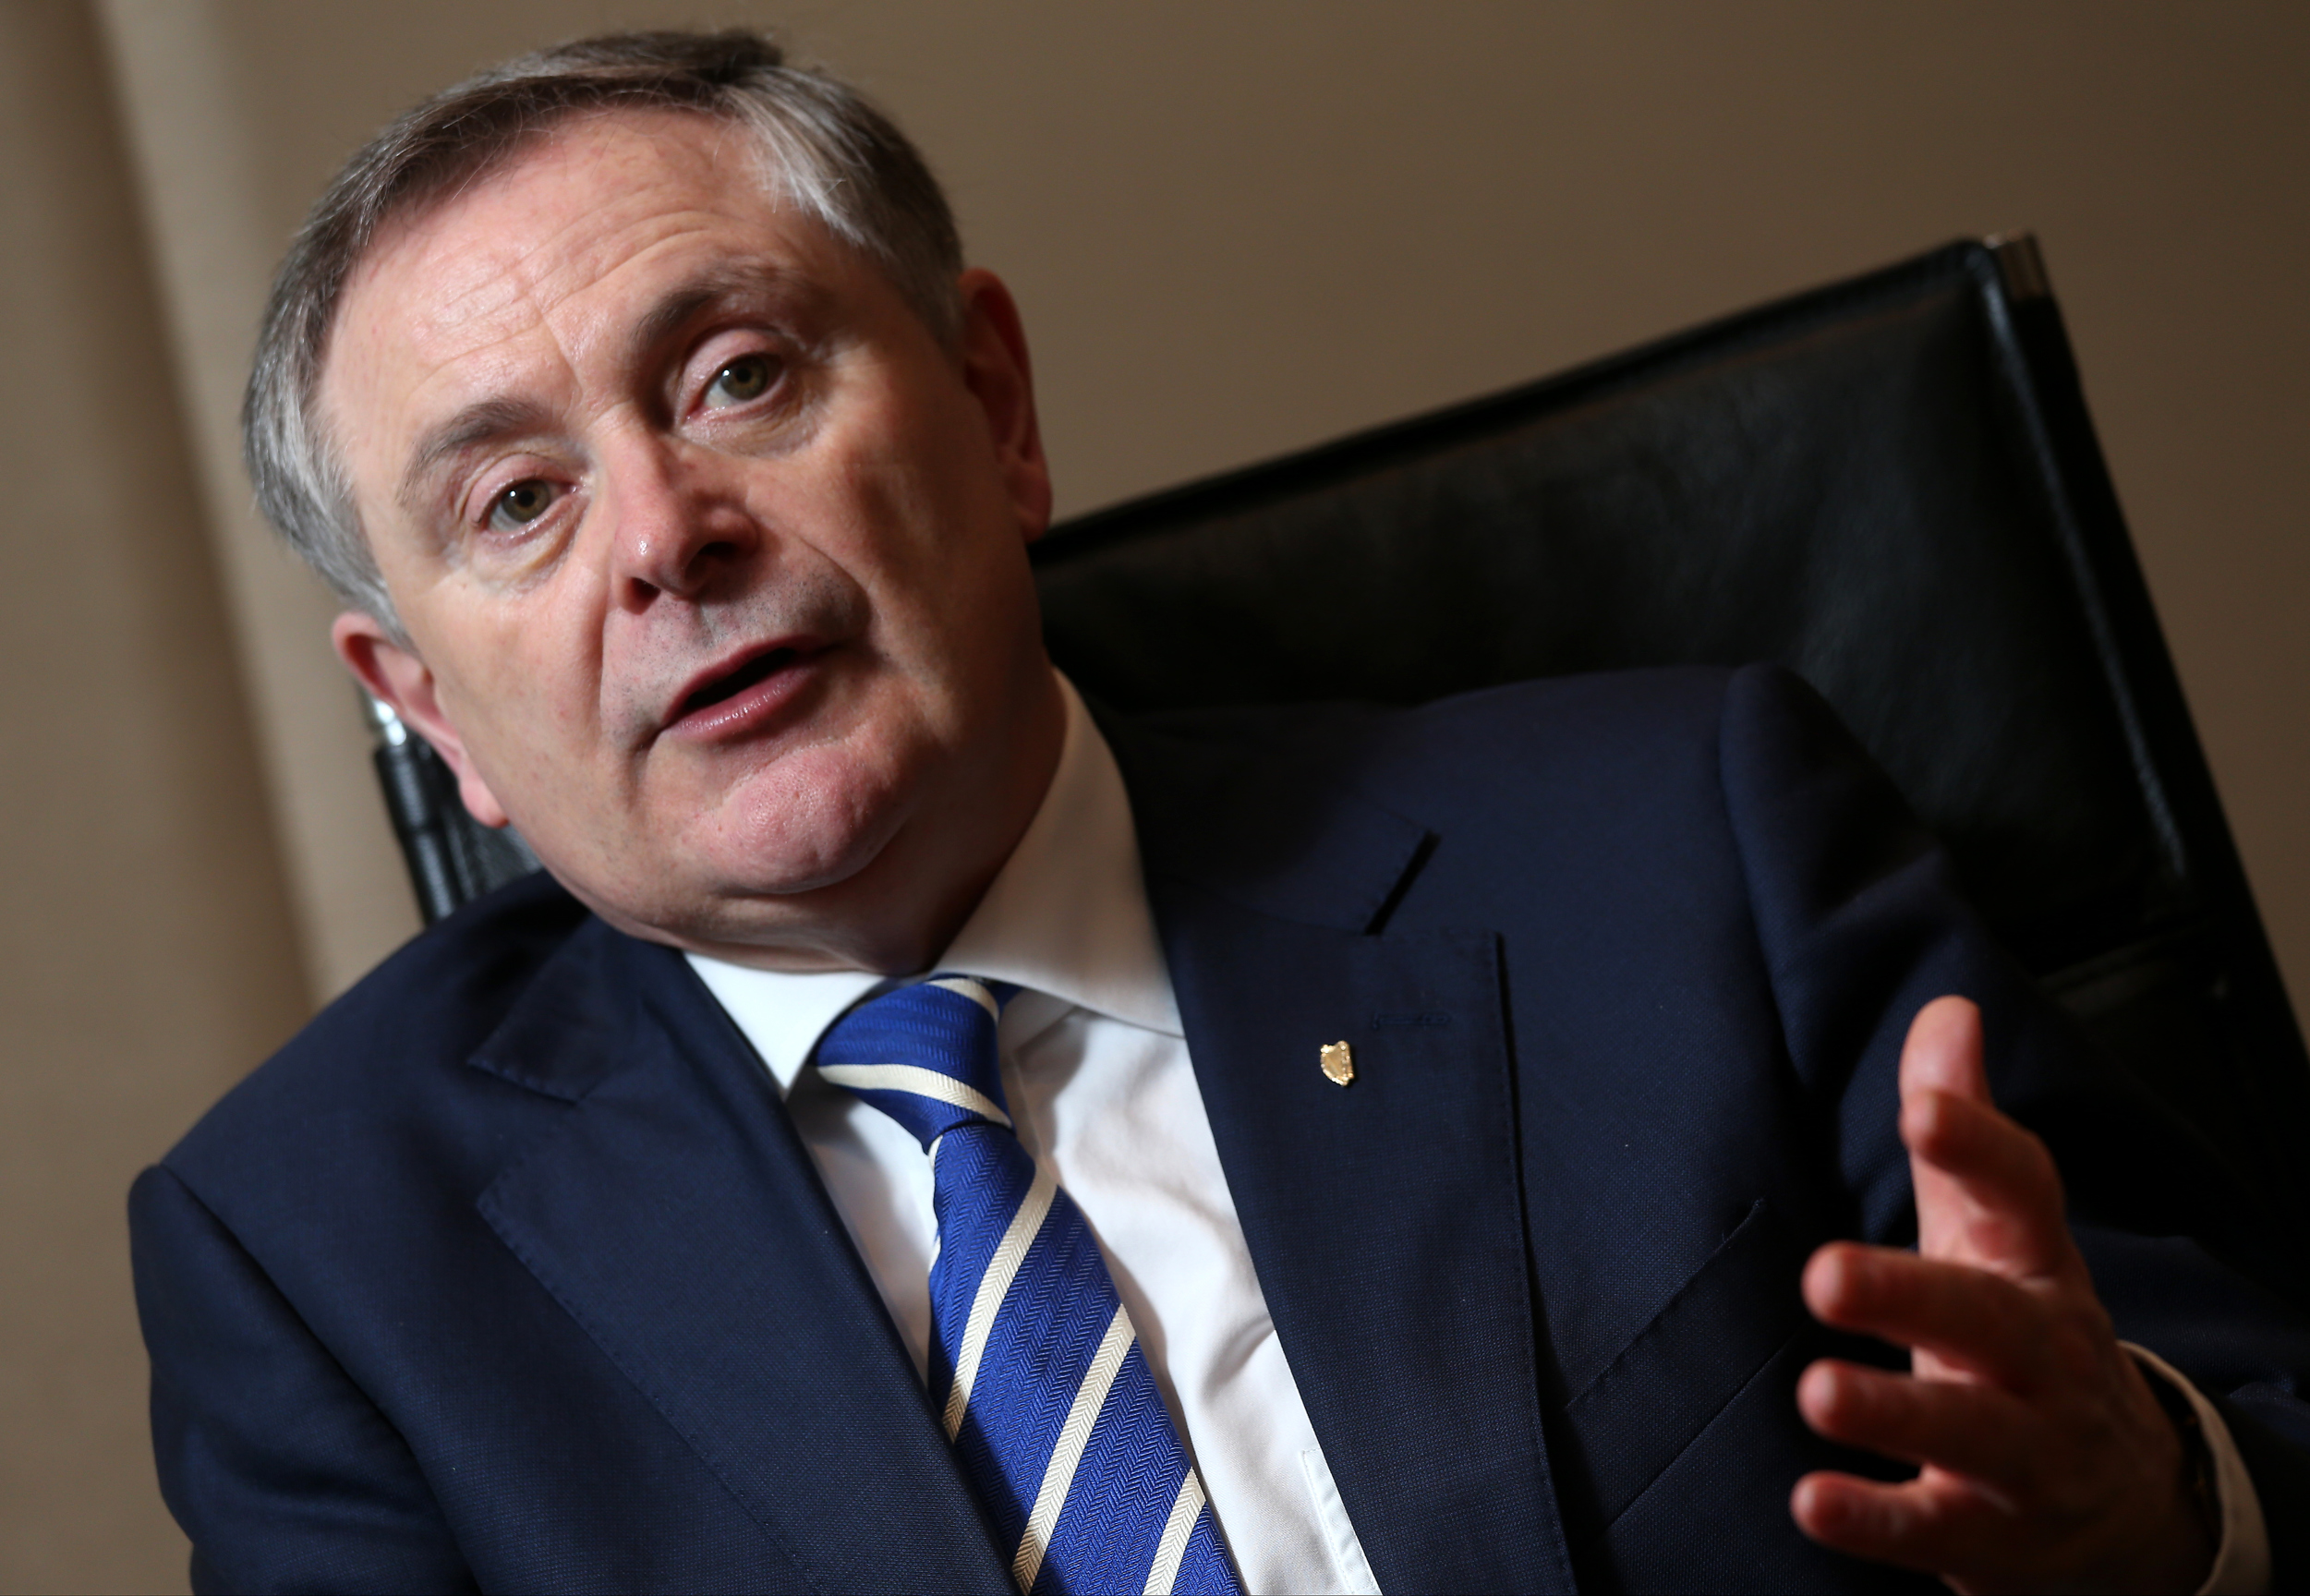 Brendan Howlin, Irish Minister for Public Expenditure and Reform. Photo: SCMP/K.Y. Cheng